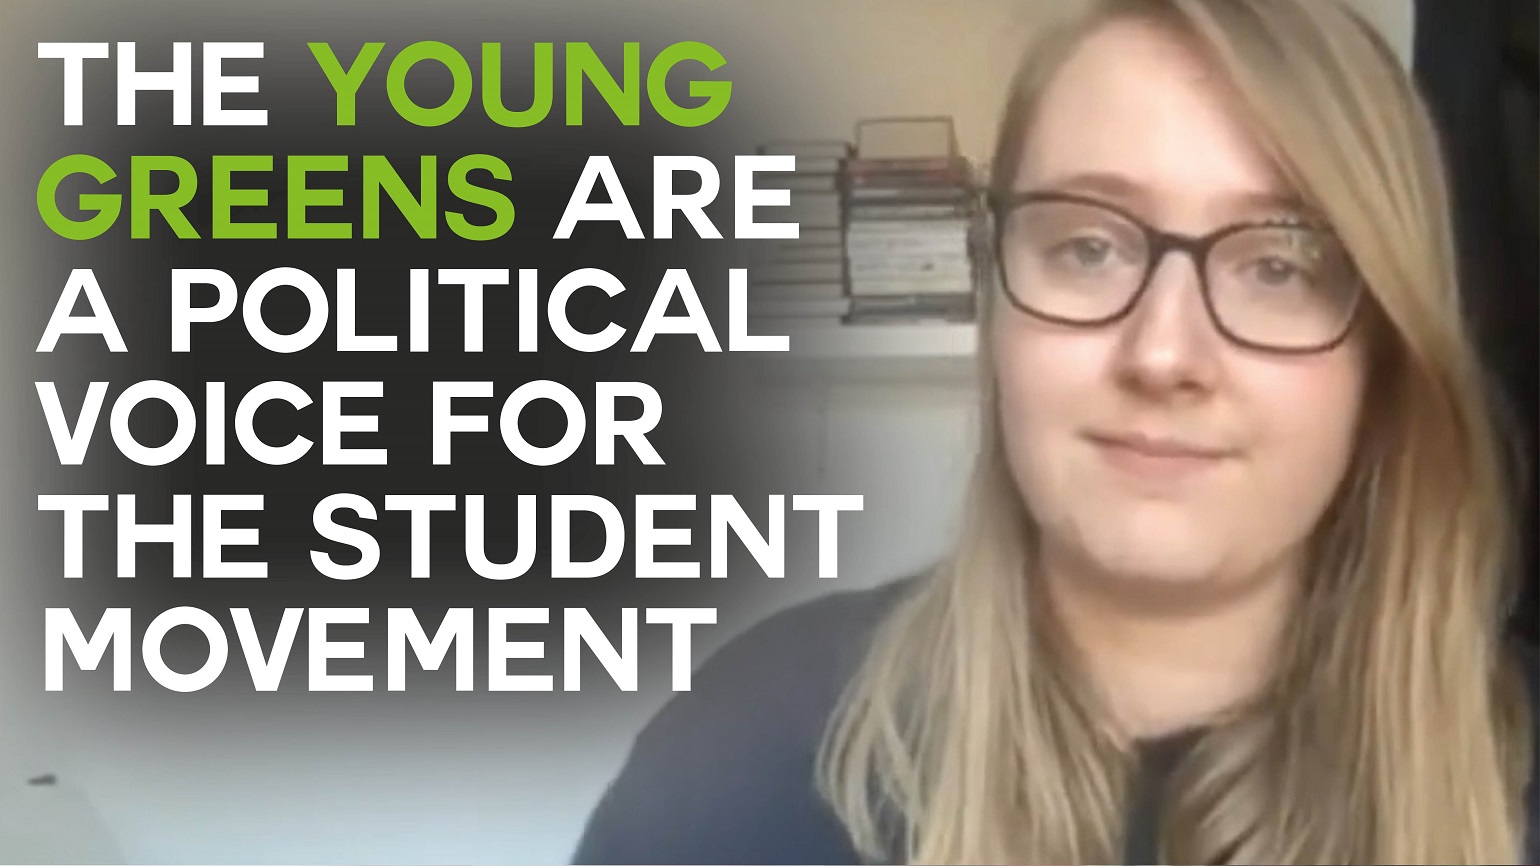 WATCH: The role of the Young Greens in the student movement – interview with Jane Baston